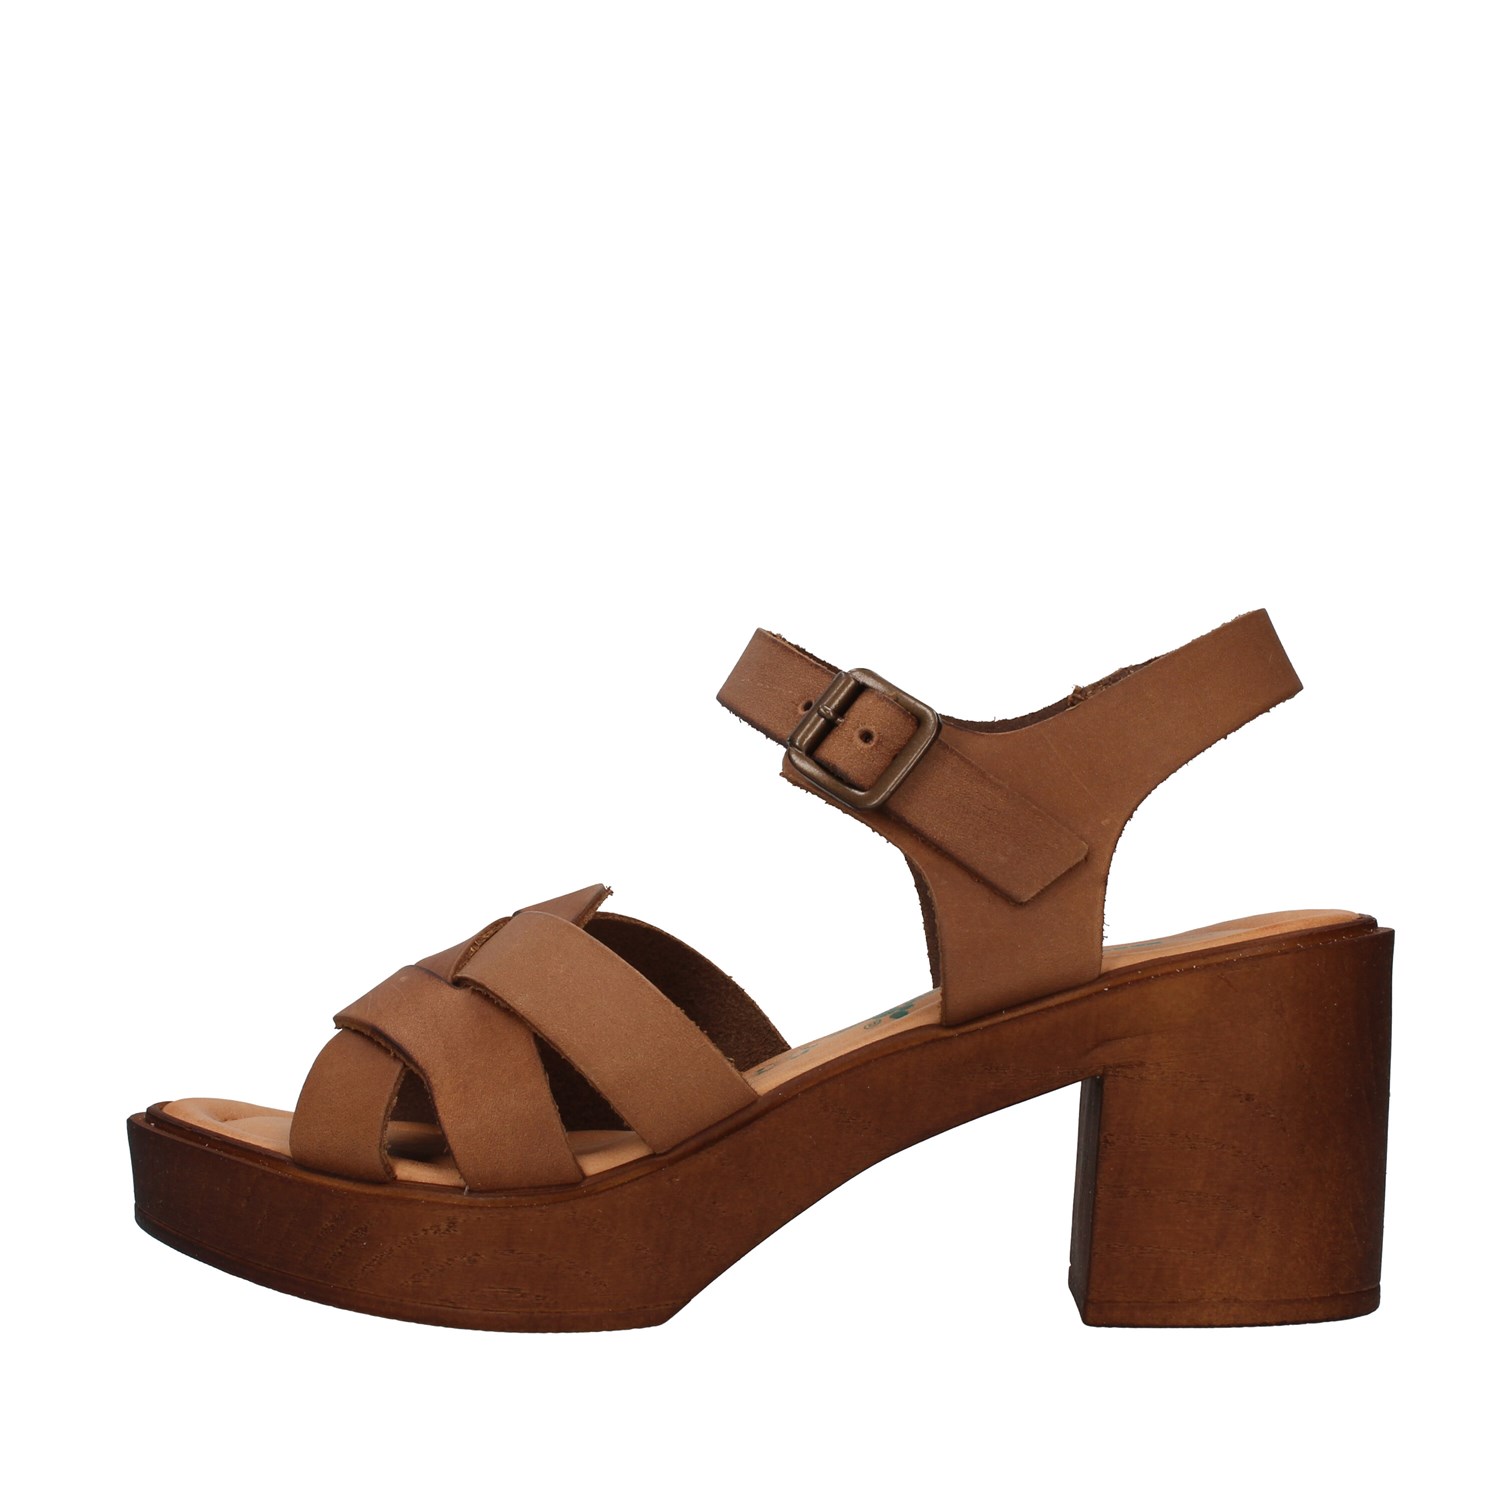 Bionatura Shoes Woman With heel BROWN 99A2268